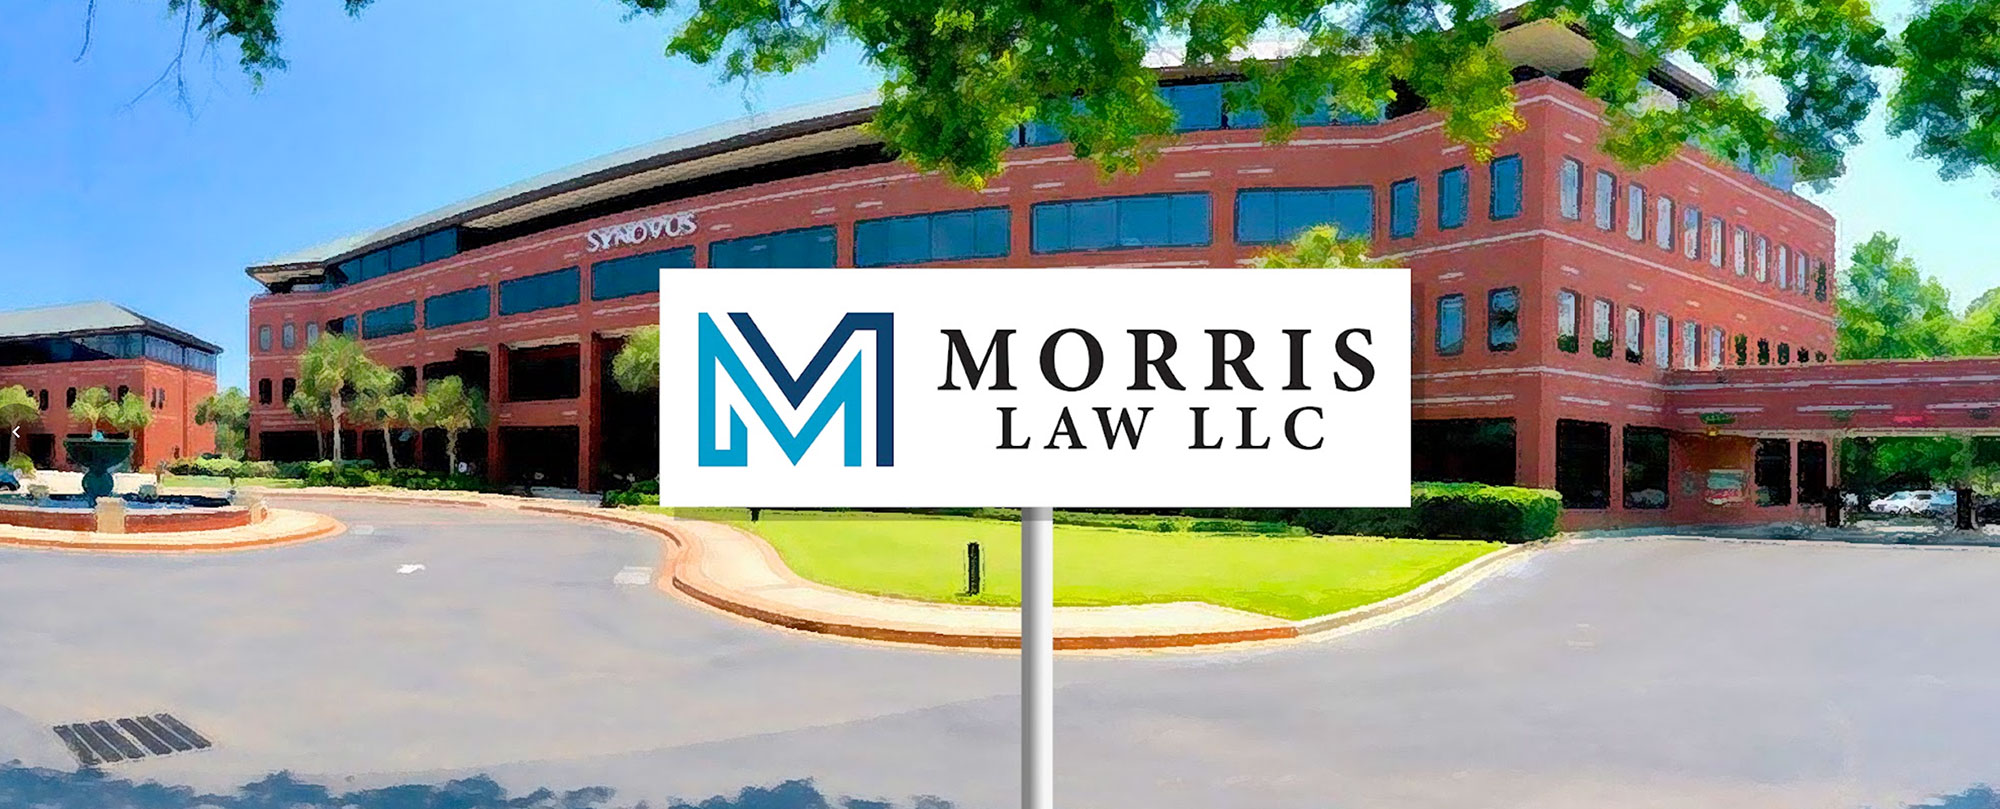 Picture of the Jeff Morris Law Accident Injury Lawyers building in Myrtle Beach